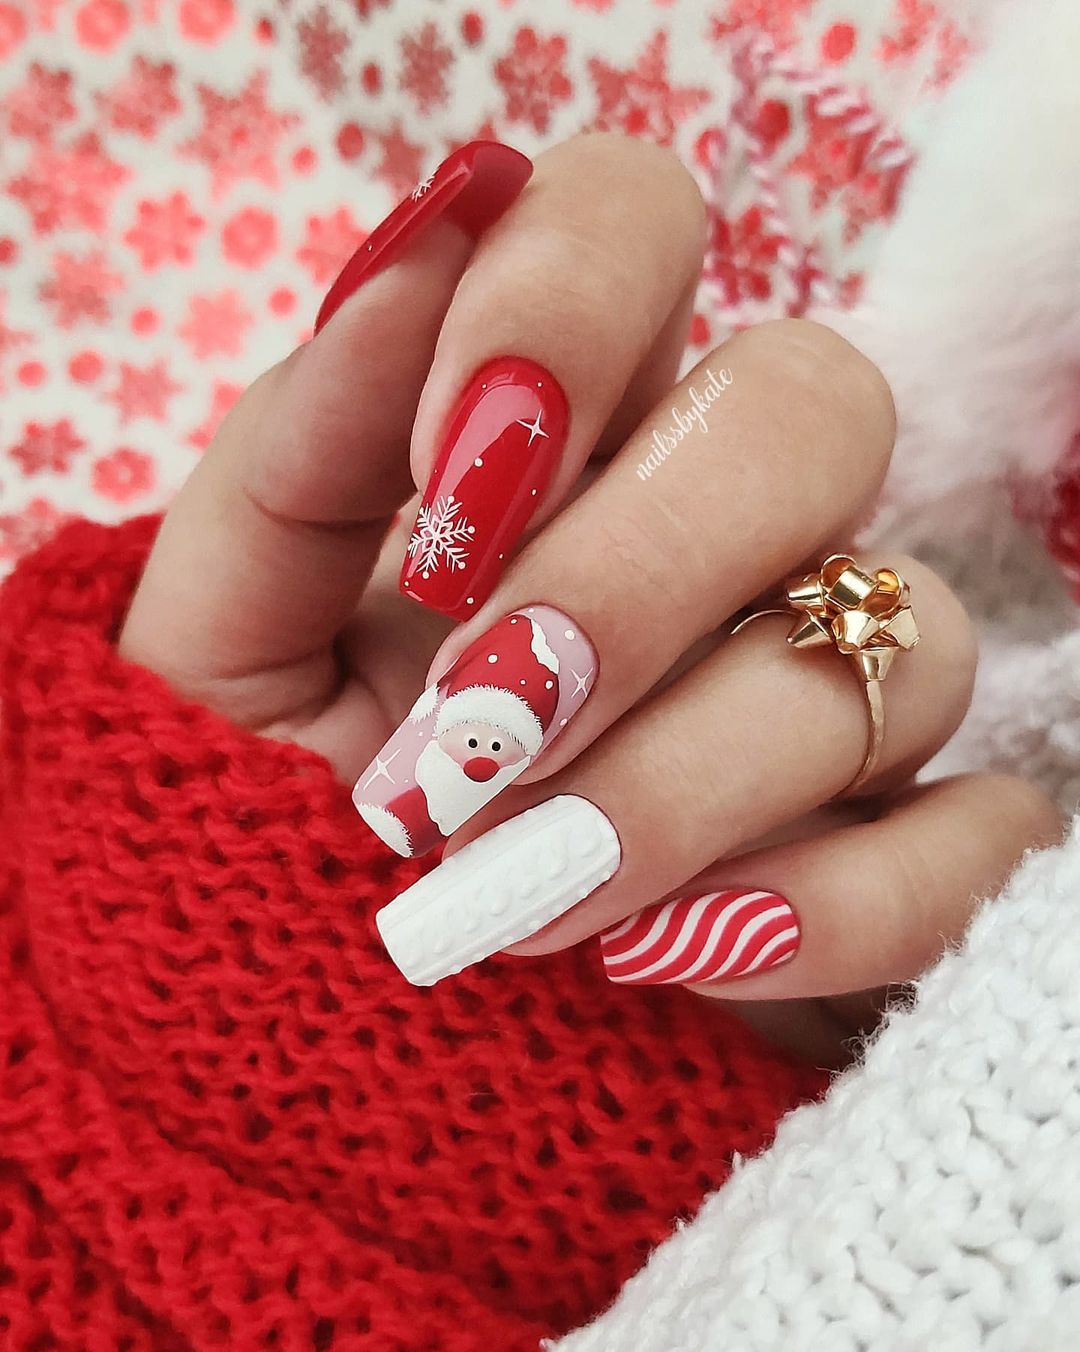 Red and White Nails with Santa Design